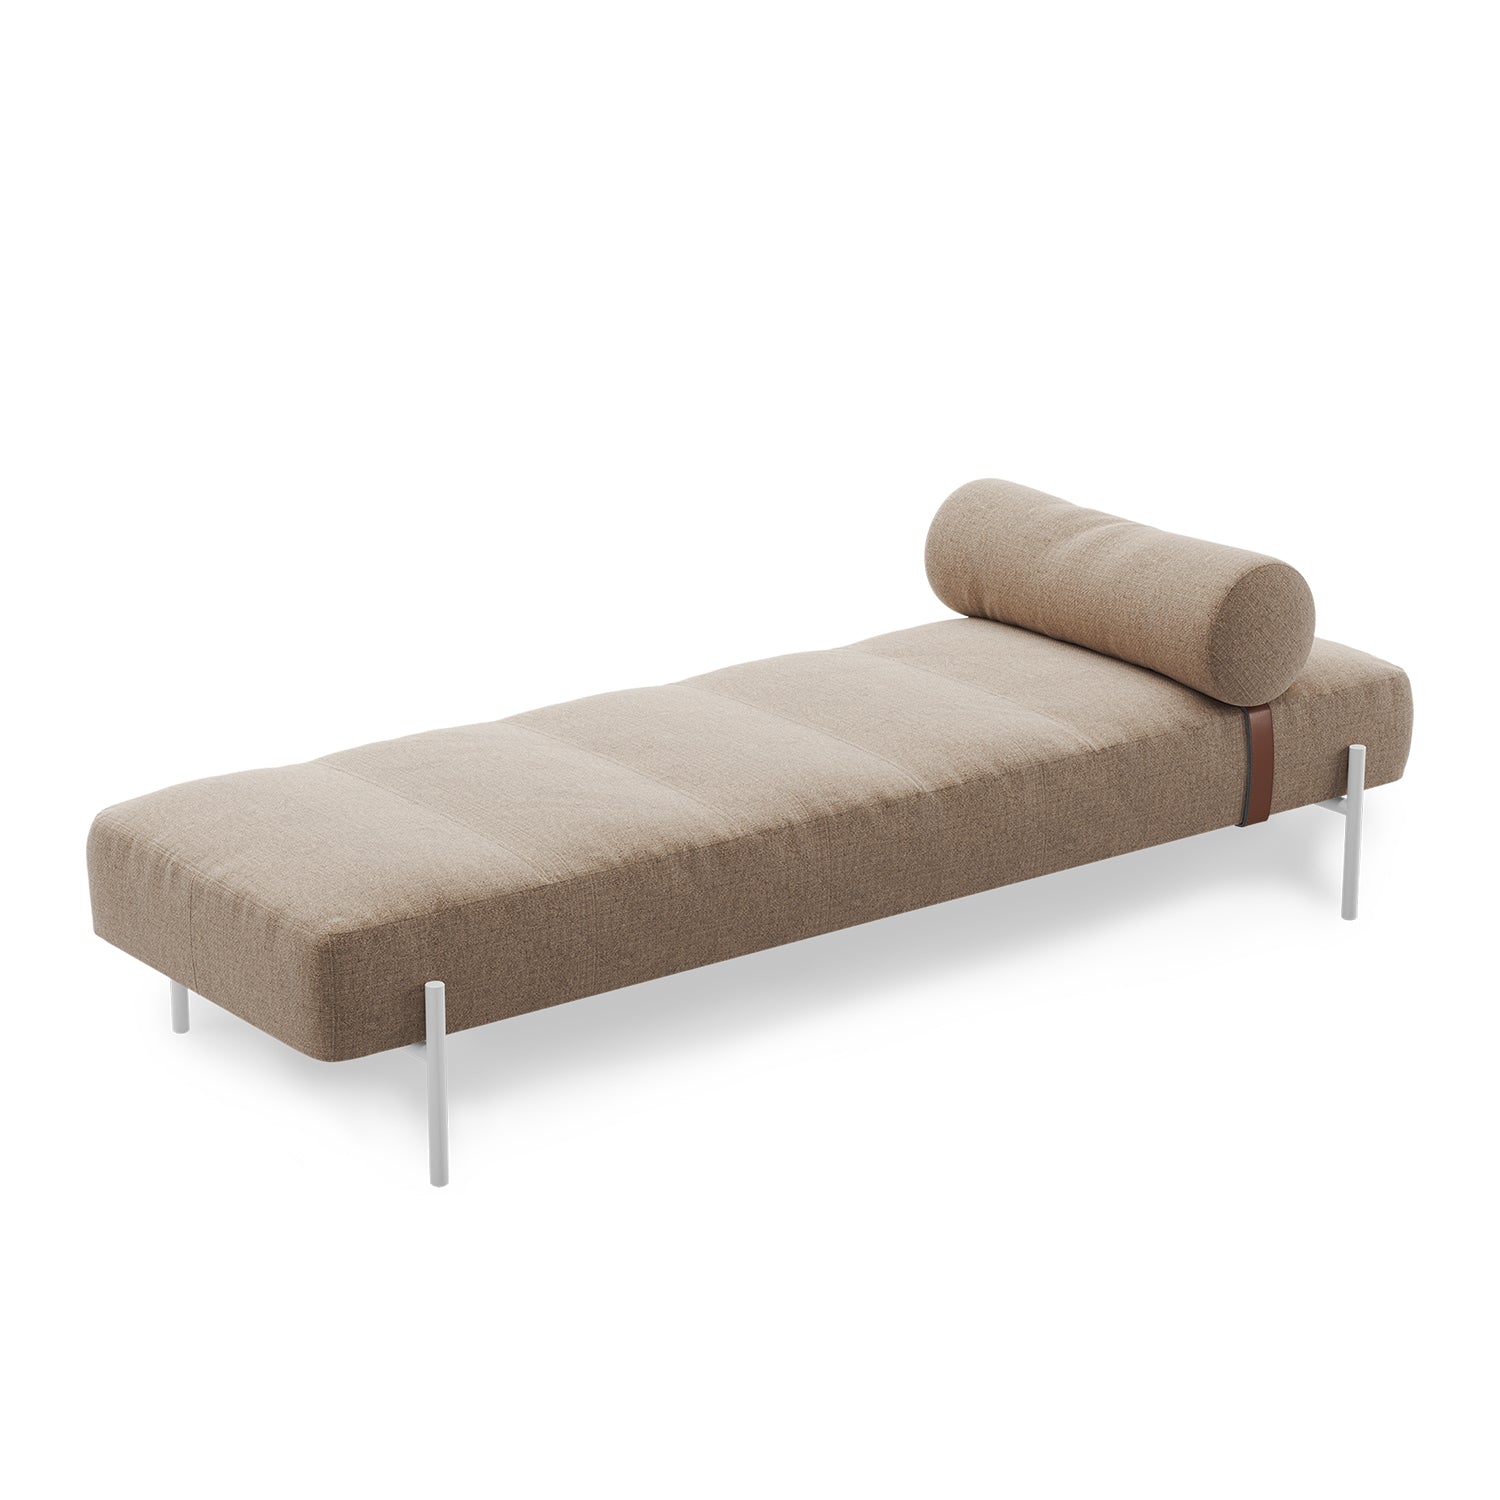 Northern Daybe Daybed in brusvik 65 and White legs